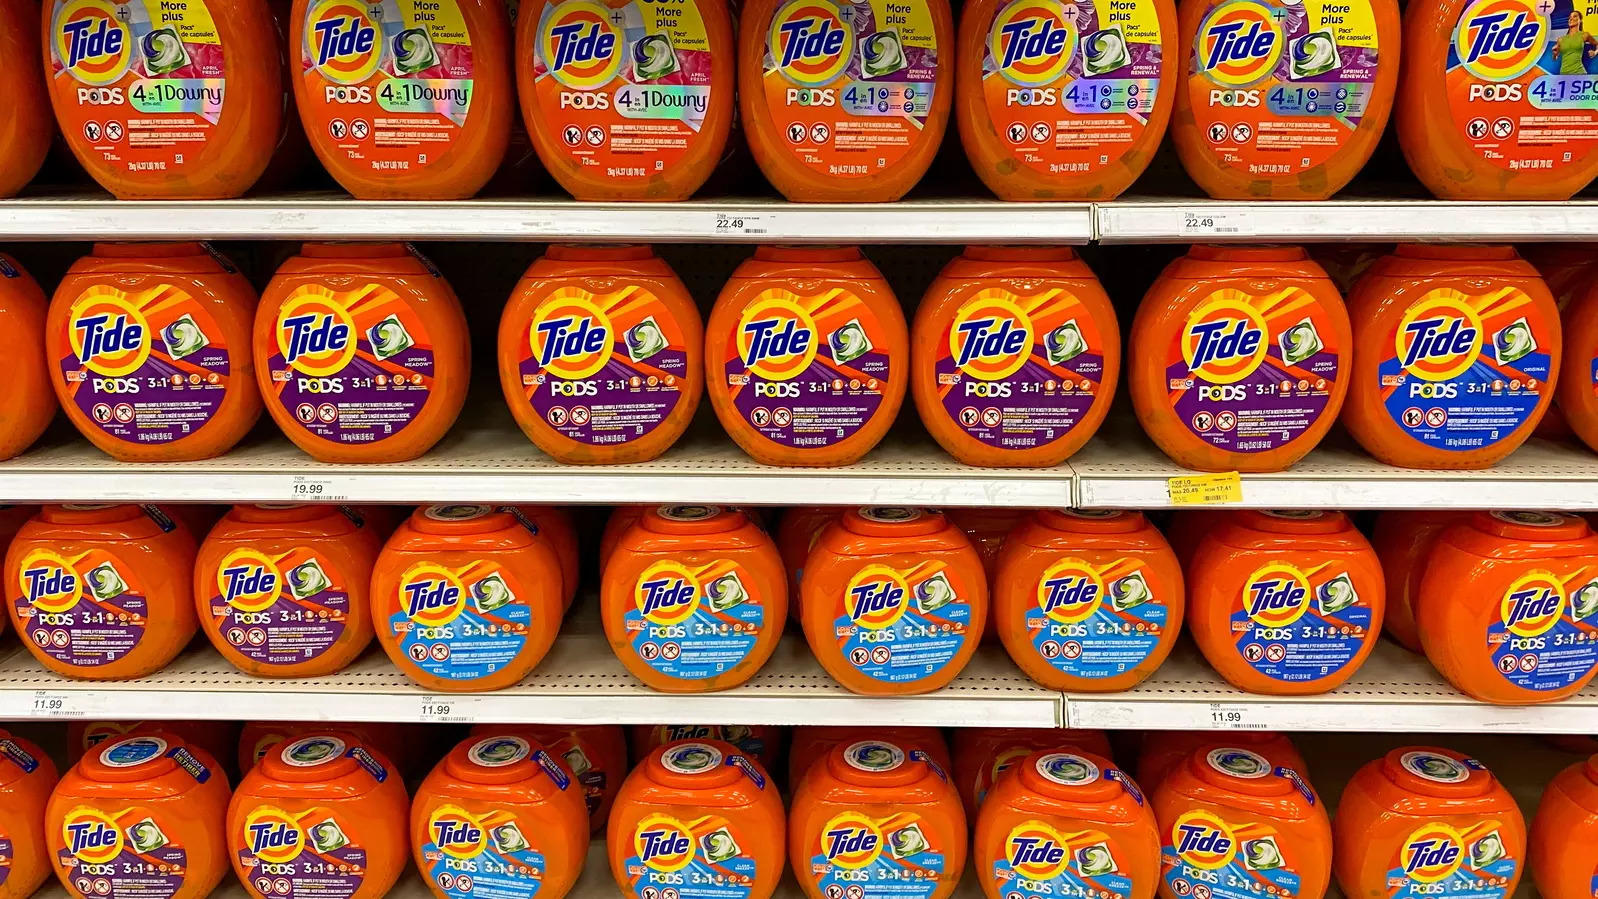 P&G products in a supermarket. On July 30th, Procter & Gamble